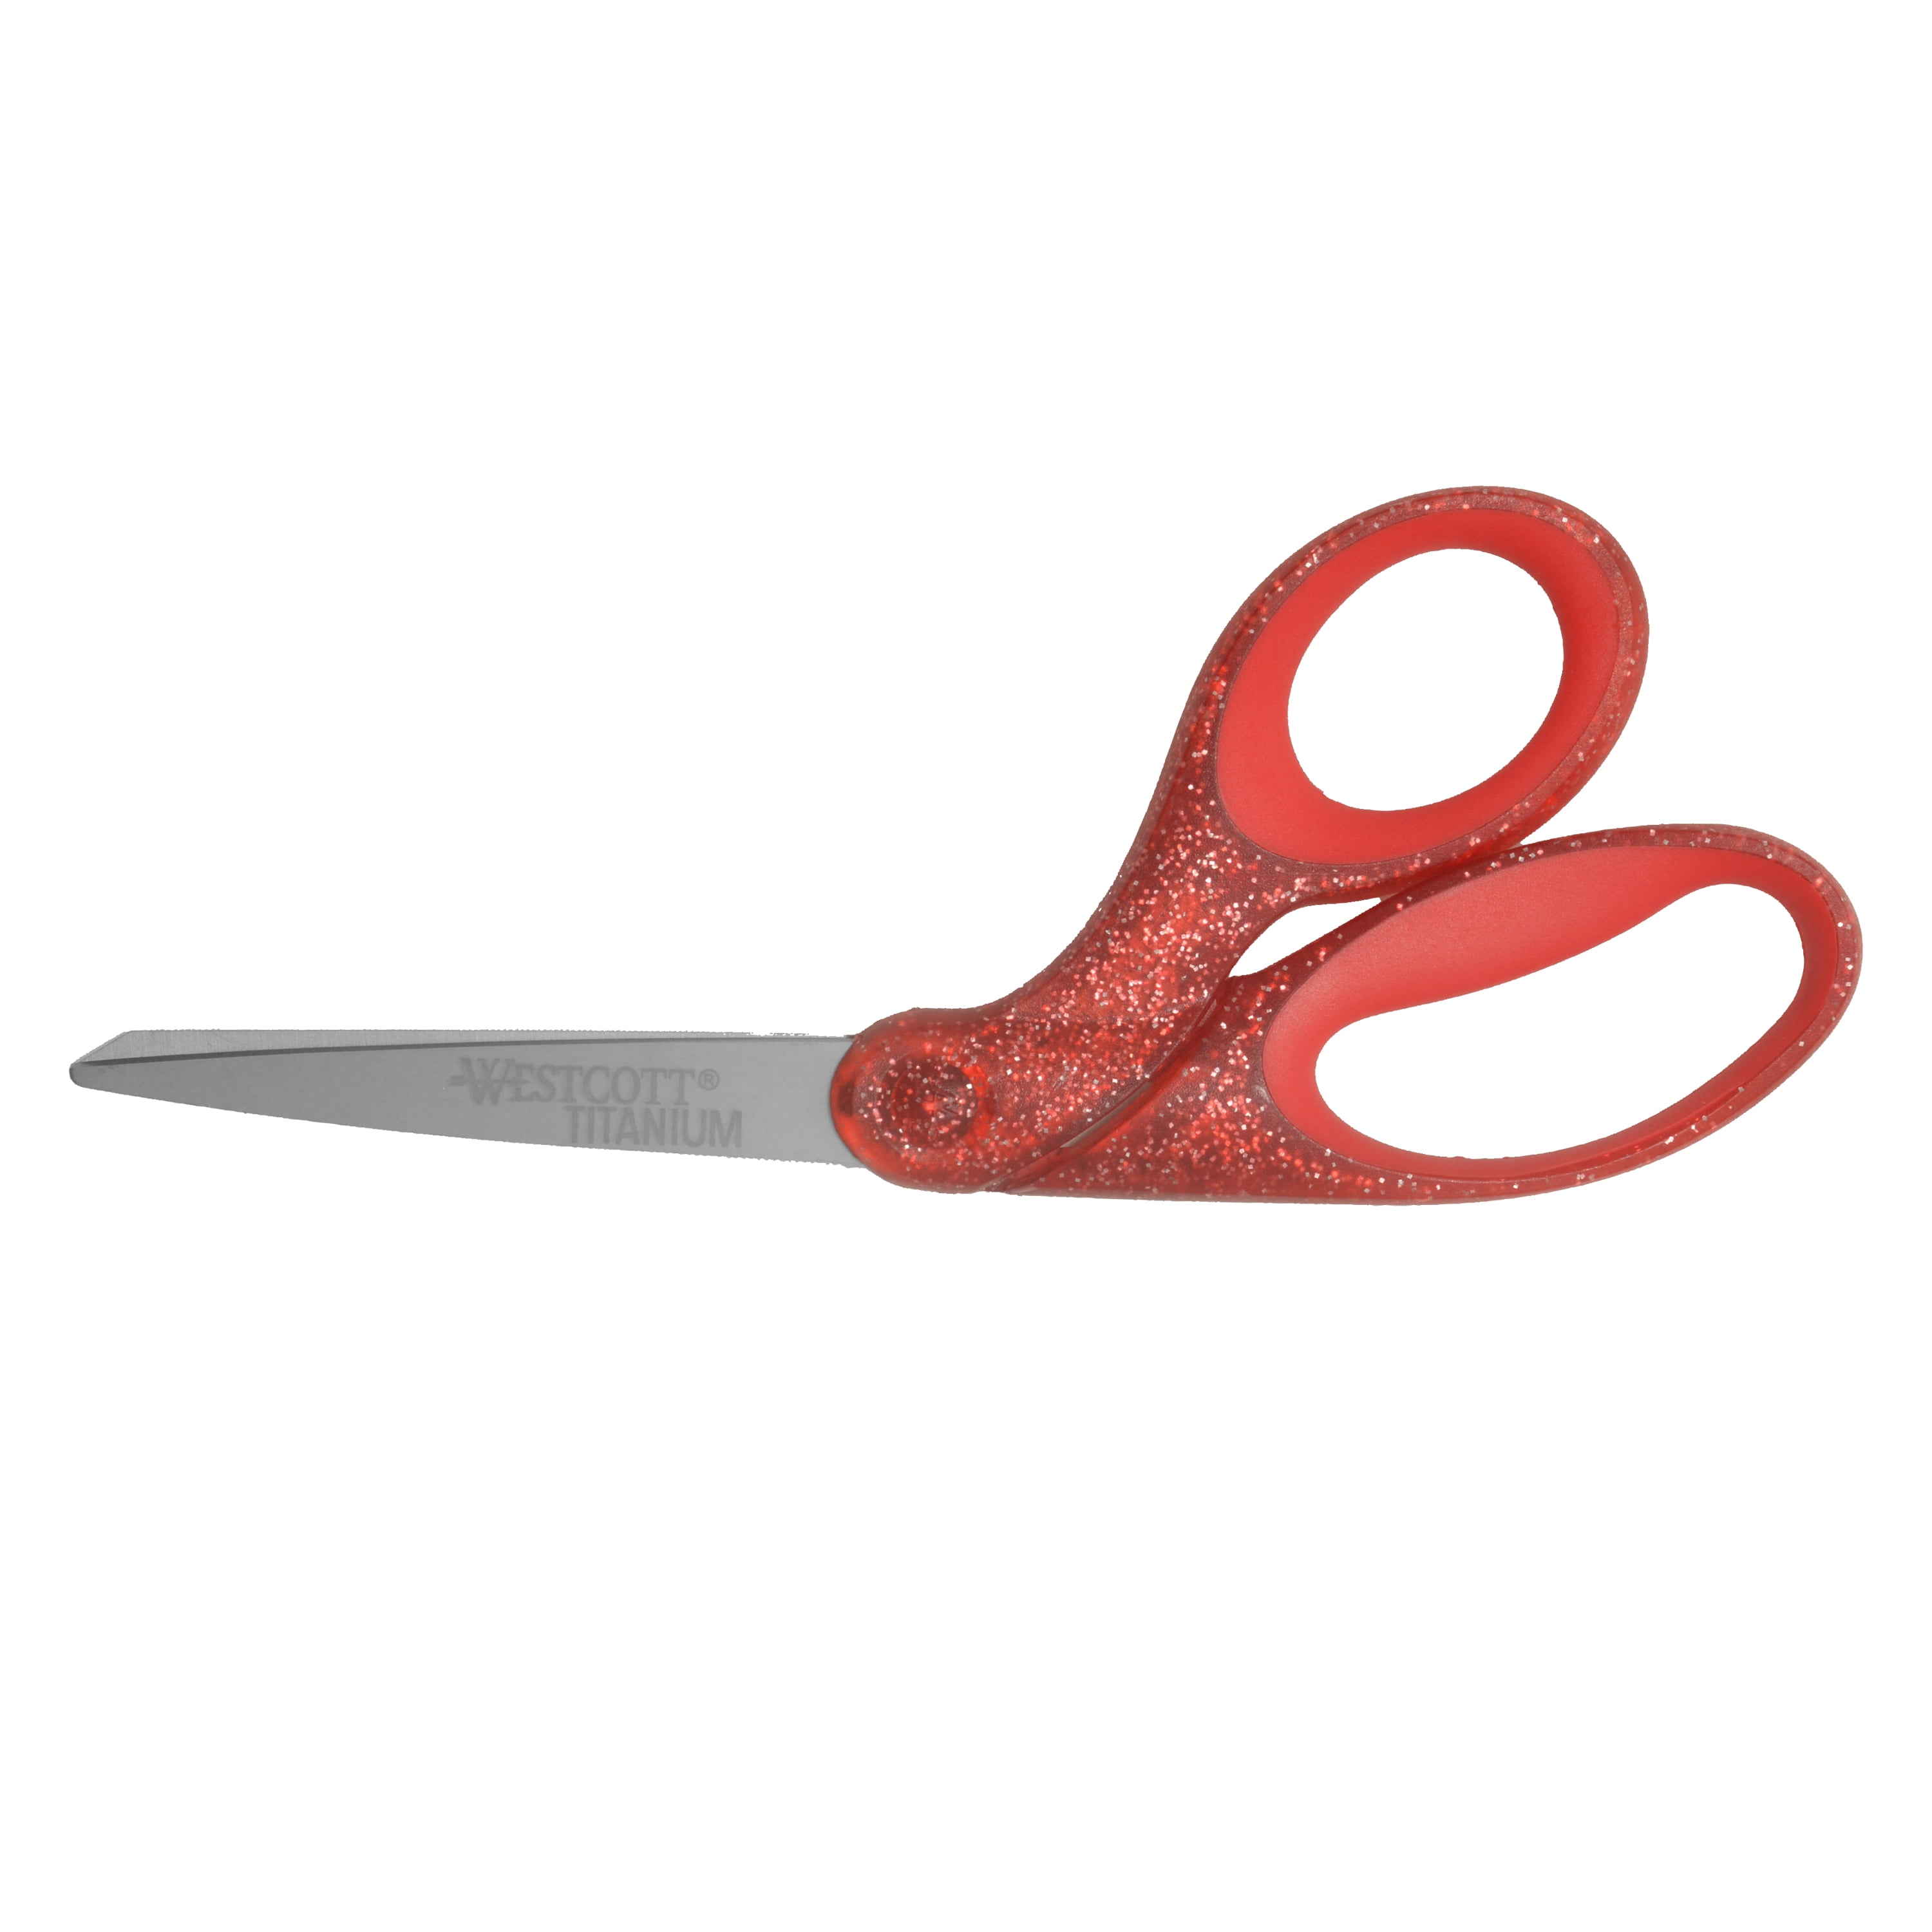 Westcott All Purpose Value Stainless Steel Scissors 8 Pointed Red